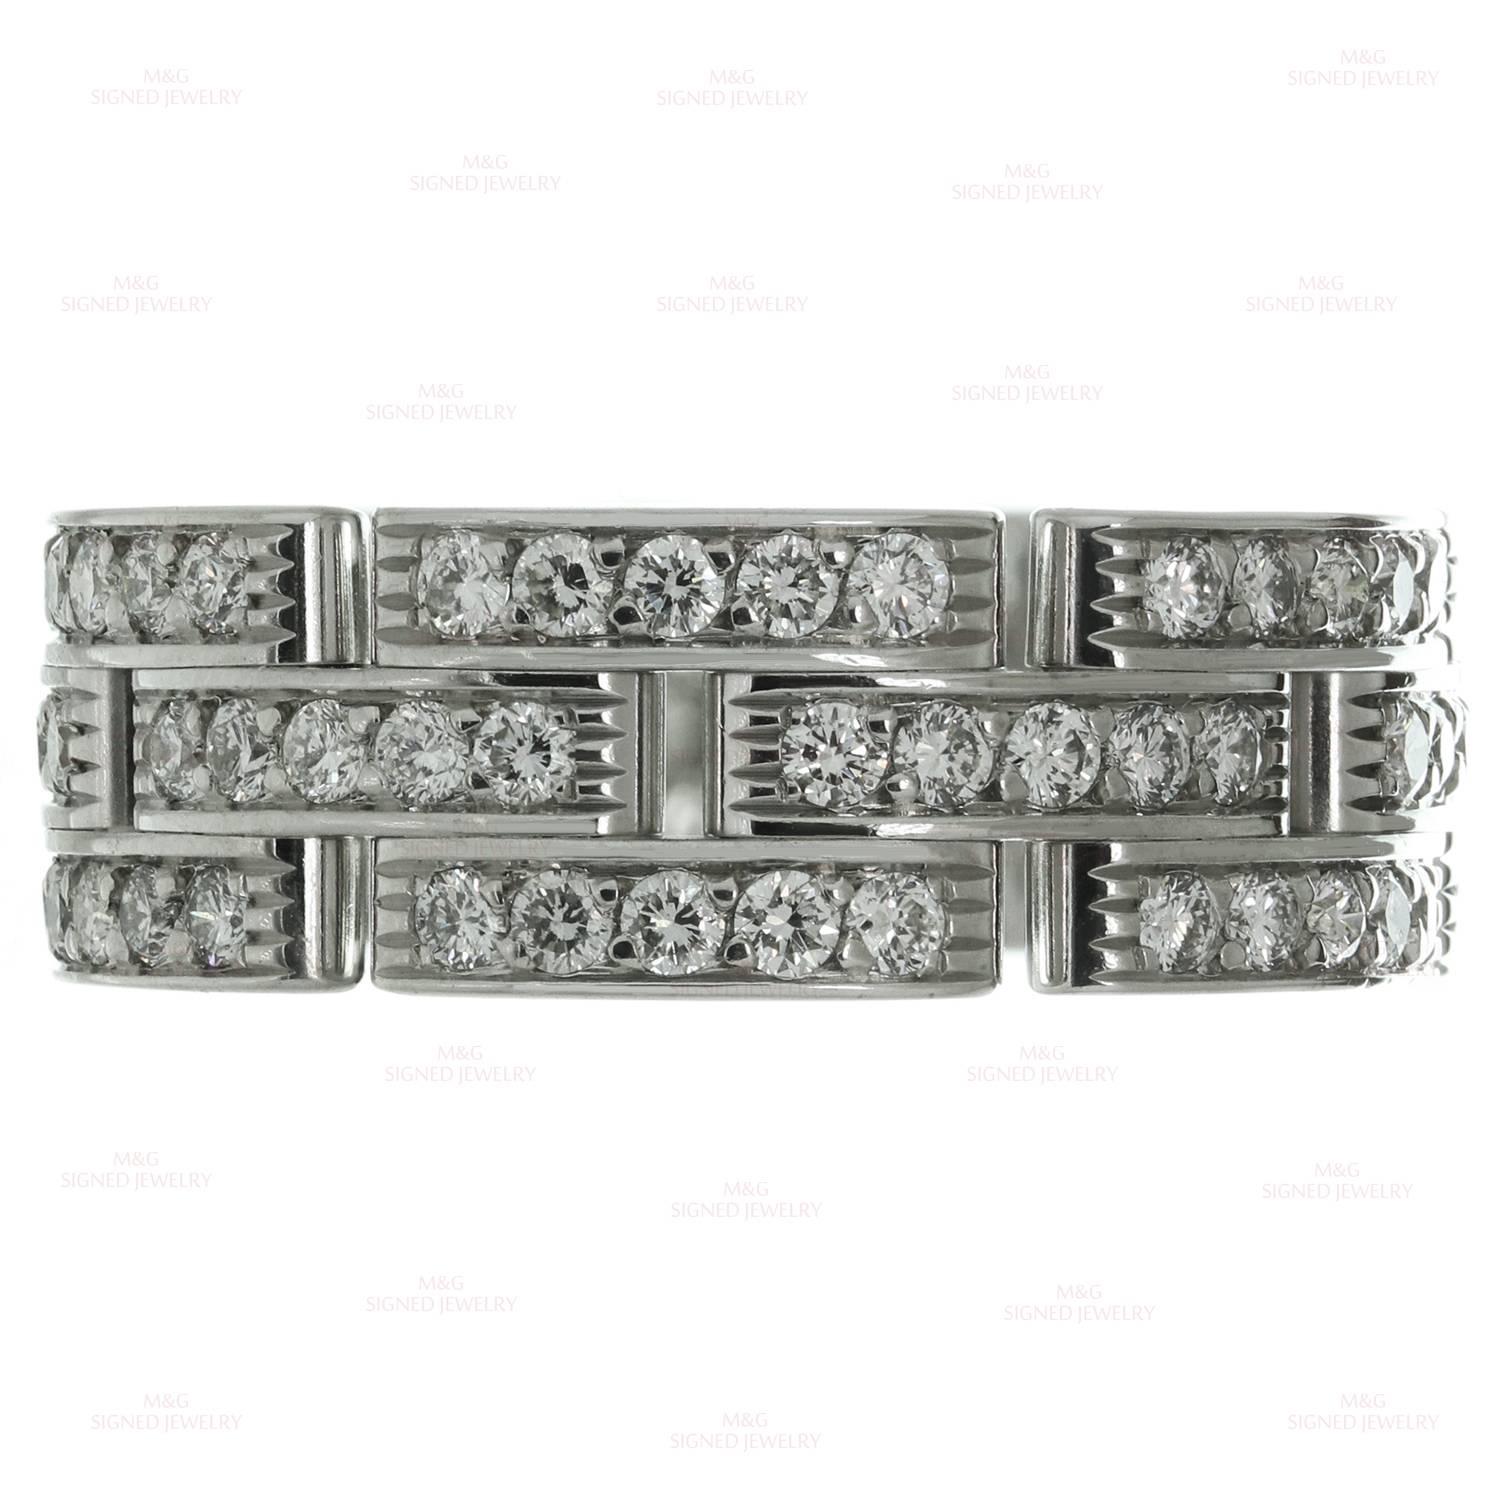 This 3-row ring from Cartier's Maillon Panthere collection features all round 18k white gold links pave-set with 1.40 carats of sparkling brilliant-cut round diamonds. An iconic and timeless design. Made in France circa 2000s. Measurements: